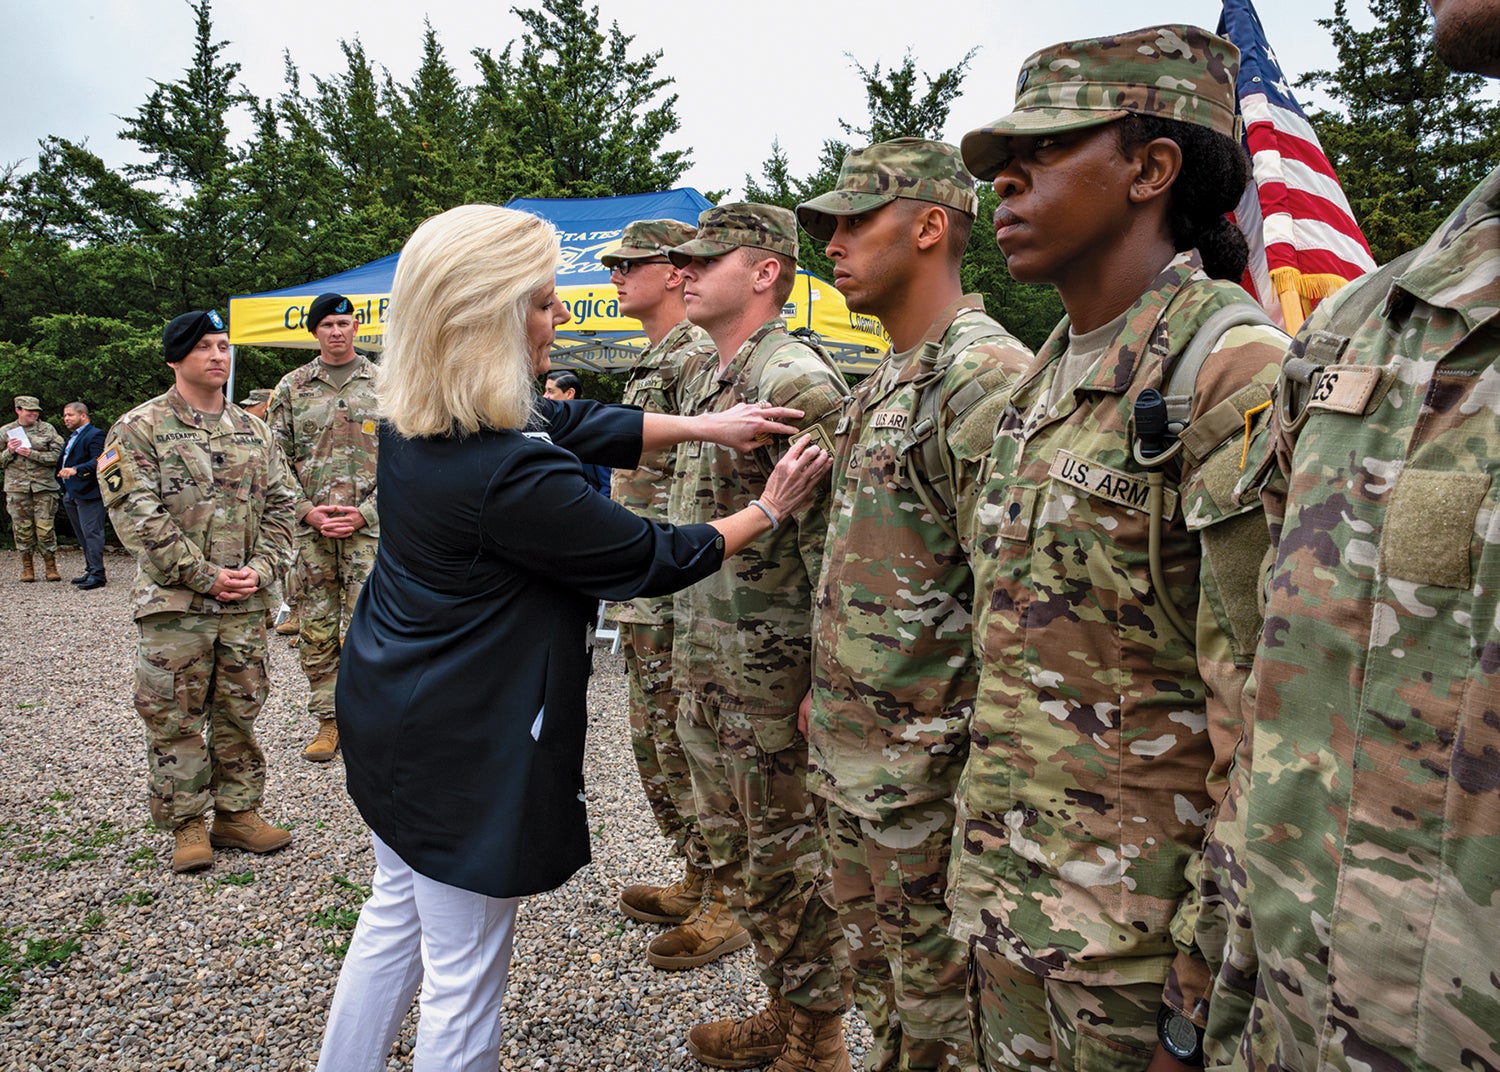 Army Secretary Christine Wormuth puts a patch on a soldier during a rite of passage ceremony at Basic Combat Training at Fort Leonard Wood, Missouri. (Courtesy Photo)